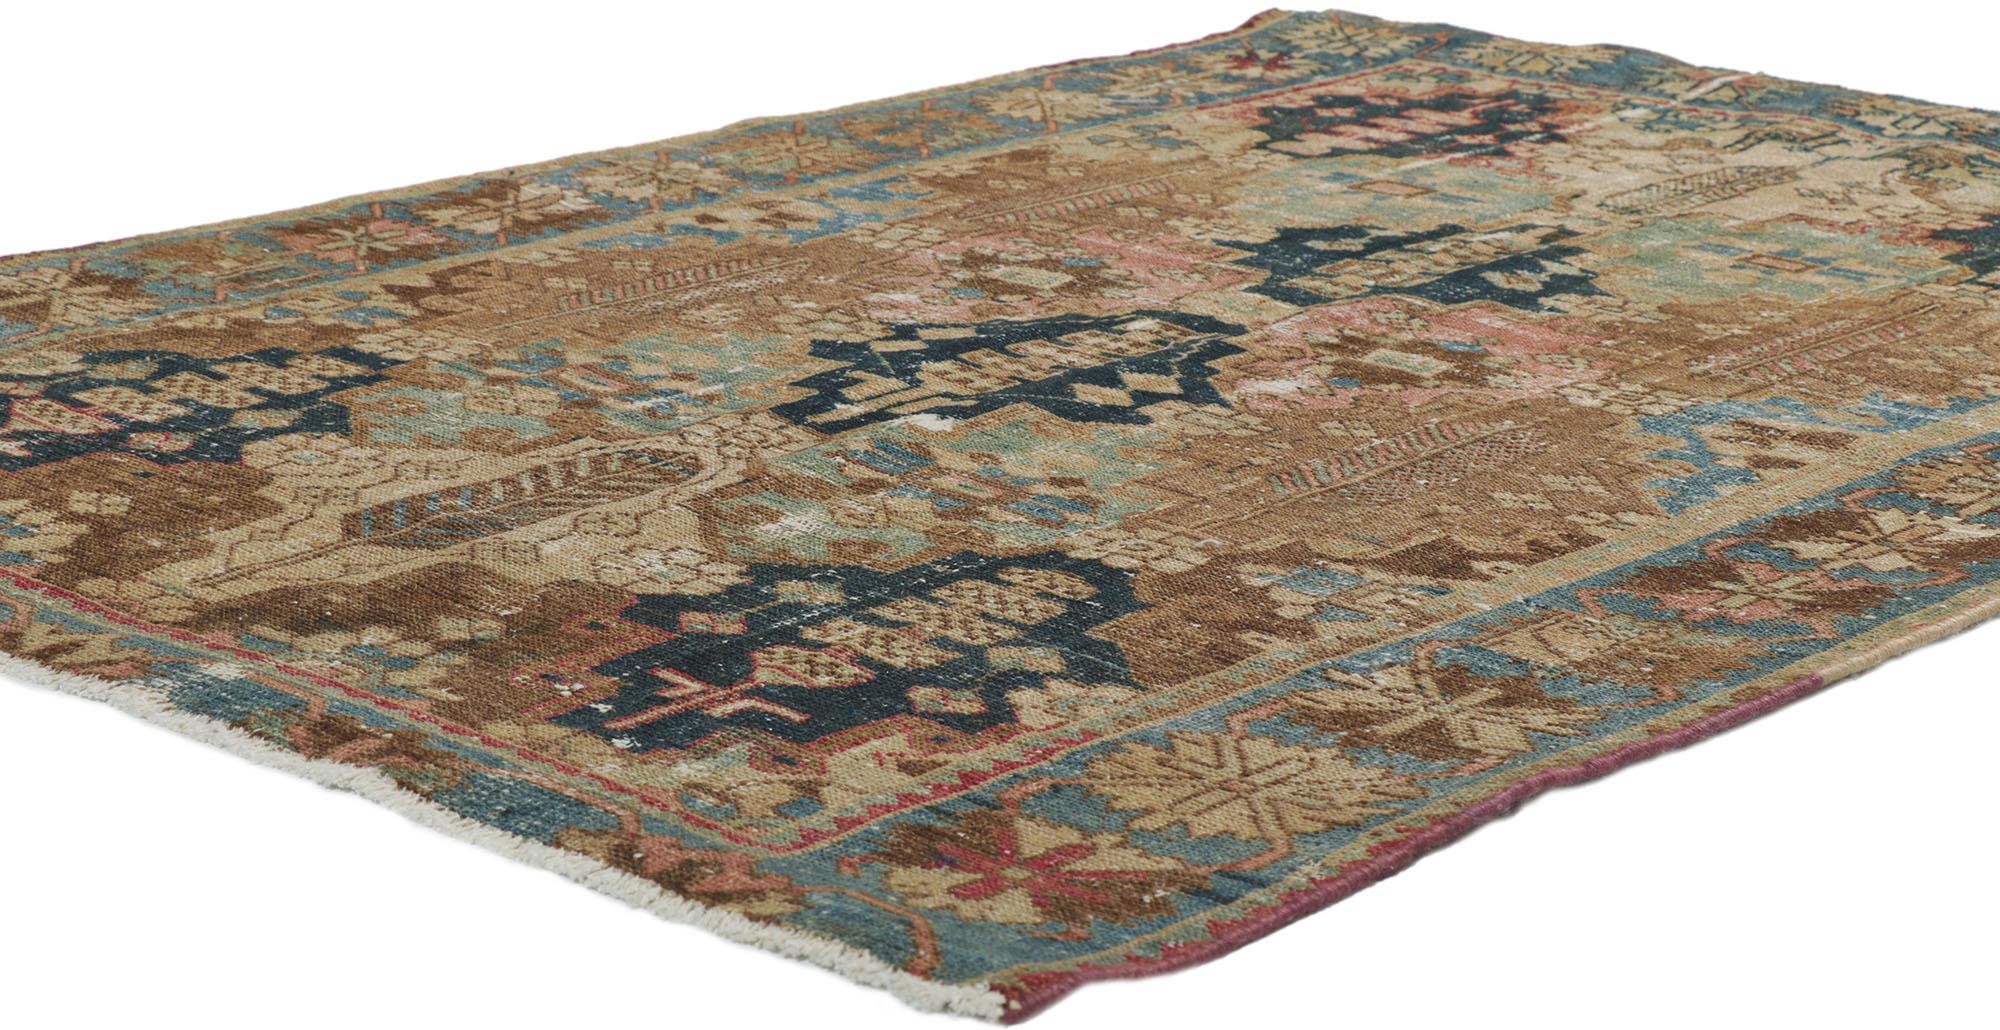 60980 Distressed Antique Persian Bakhtiari Rug 04'03 x 05'09. With its rustic sensibility and timeless botanical pattern, this hand-knotted wool distressed antique Persian Bakhtiari rug will take on a curated lived-in look that feels timeless while